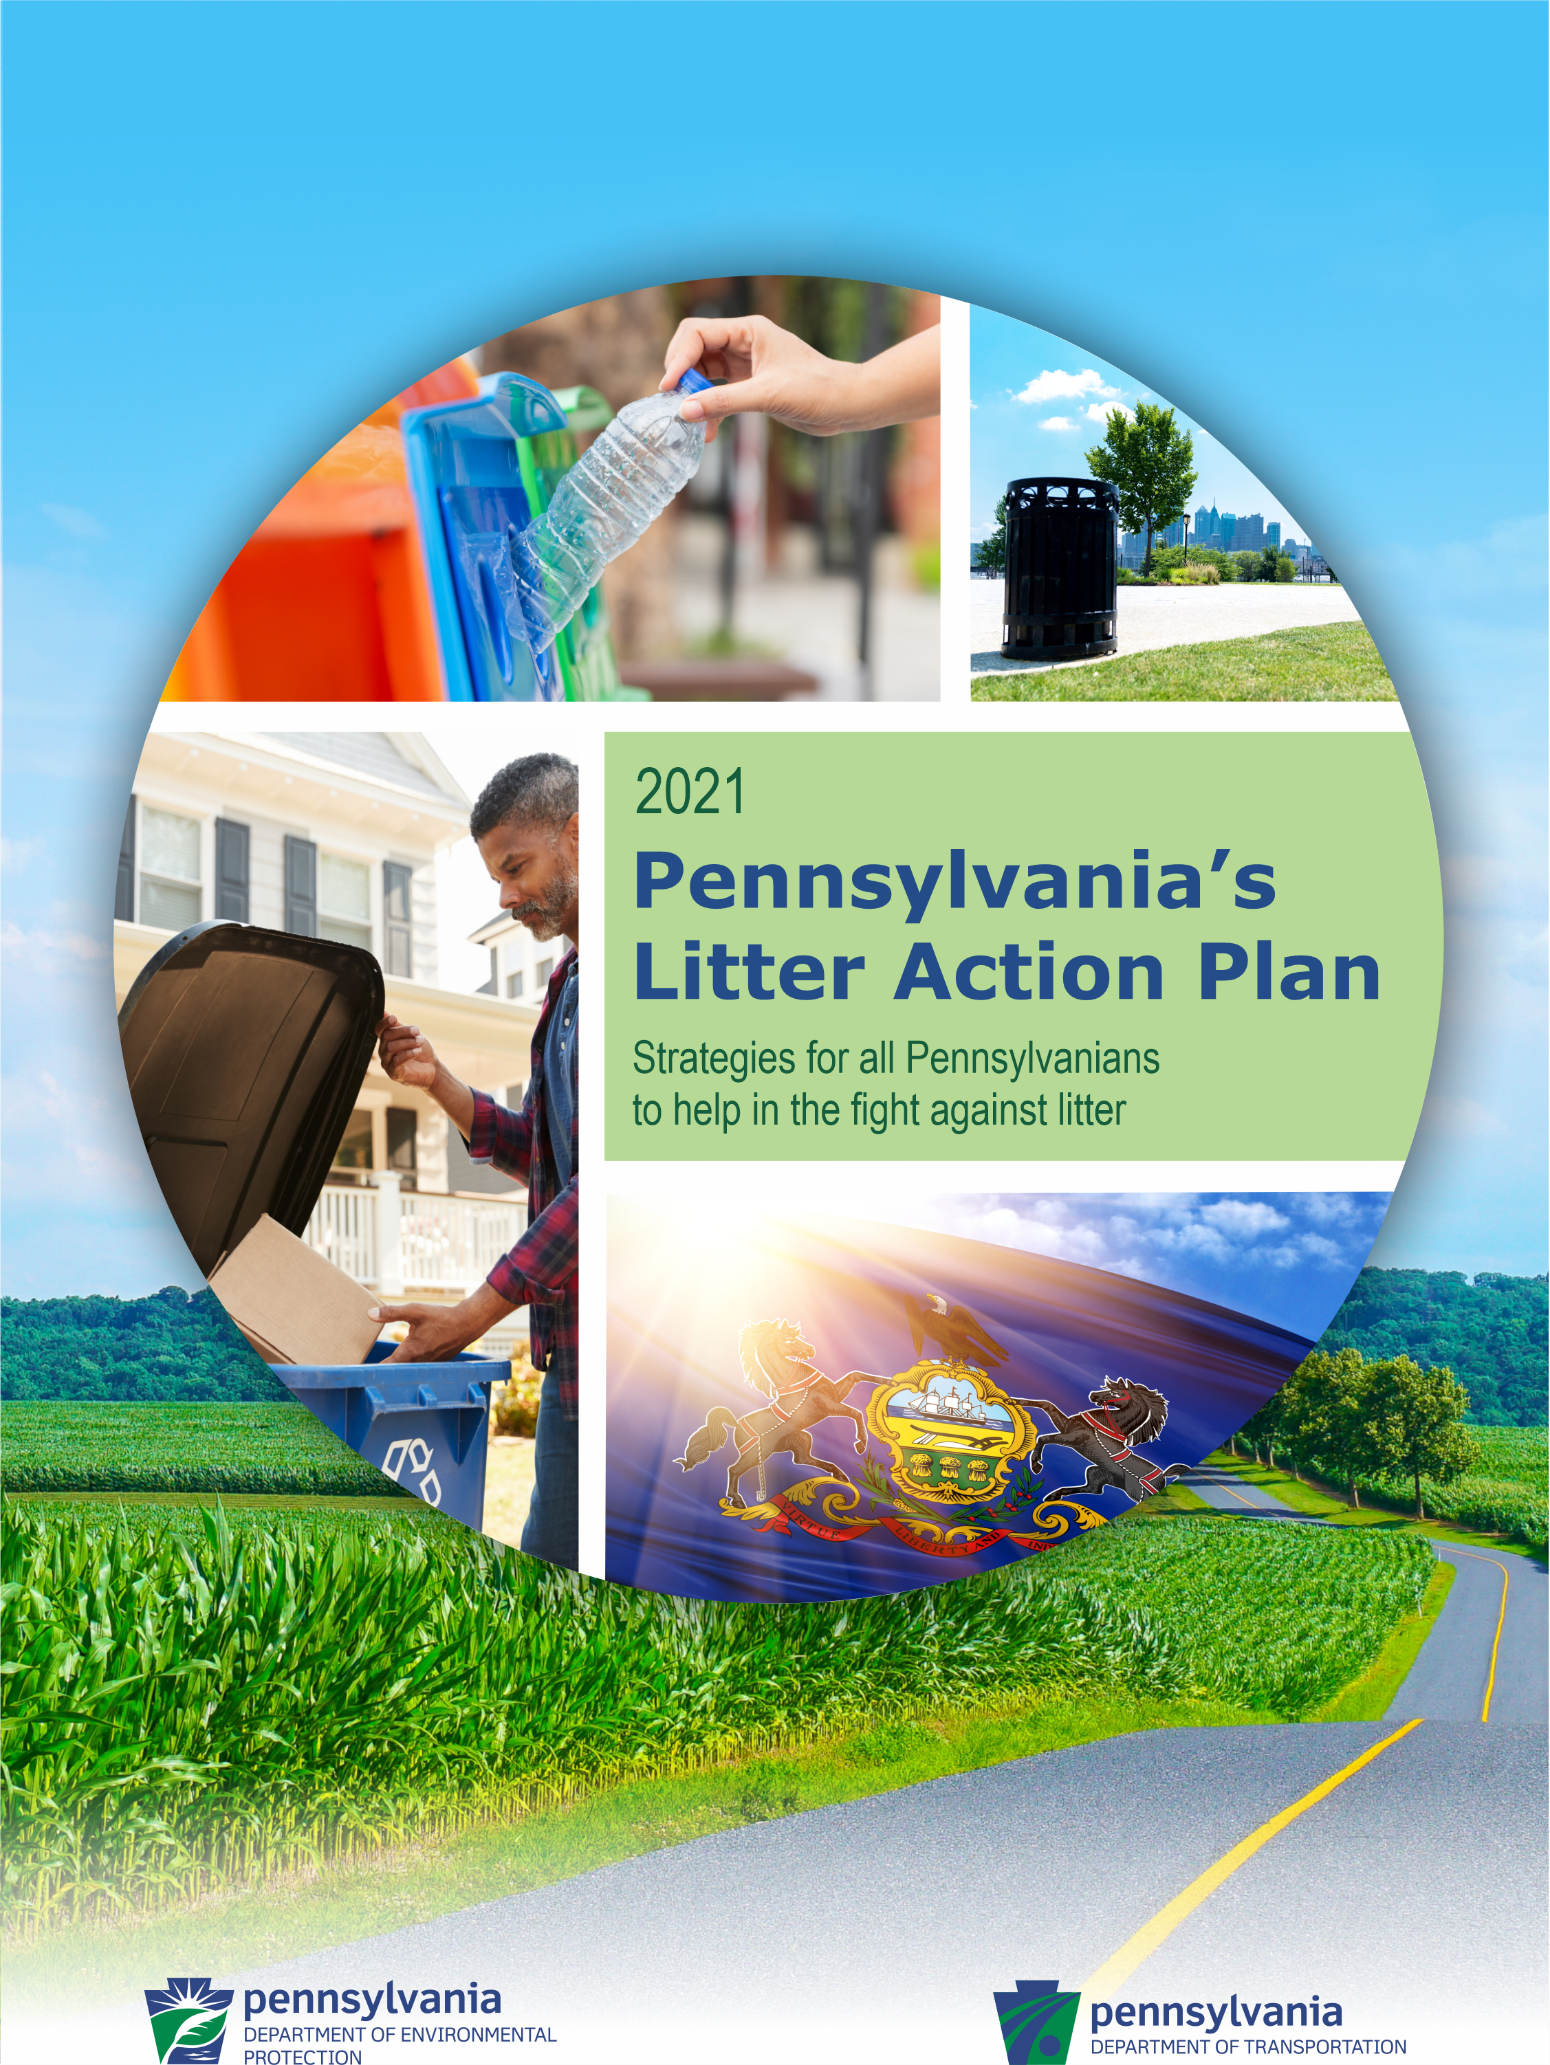 Cover of Litter Action Plan showing recycling and a clean Pennsylvania